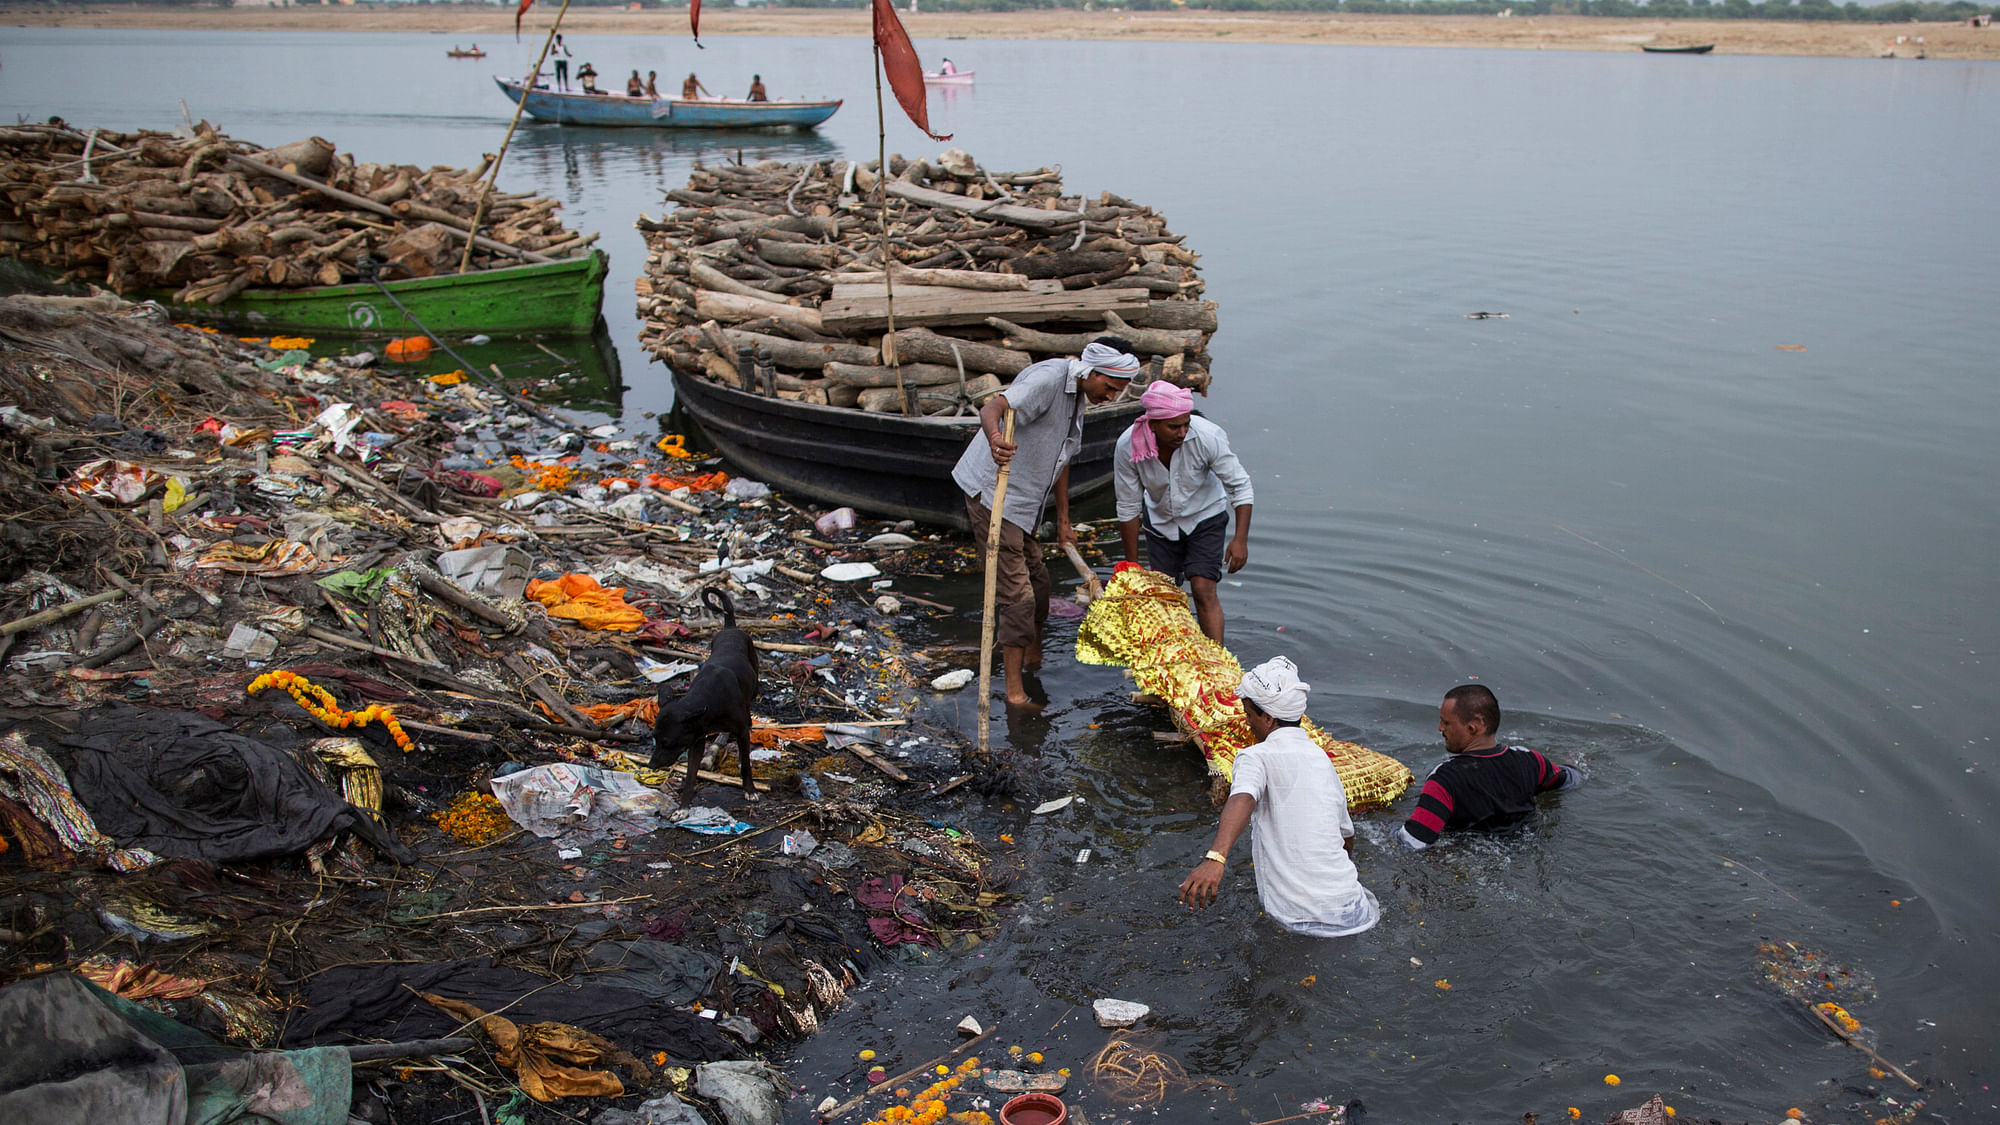 The Ganga’s polluted banks and waters in Varanasi. (Photo: Reuters)